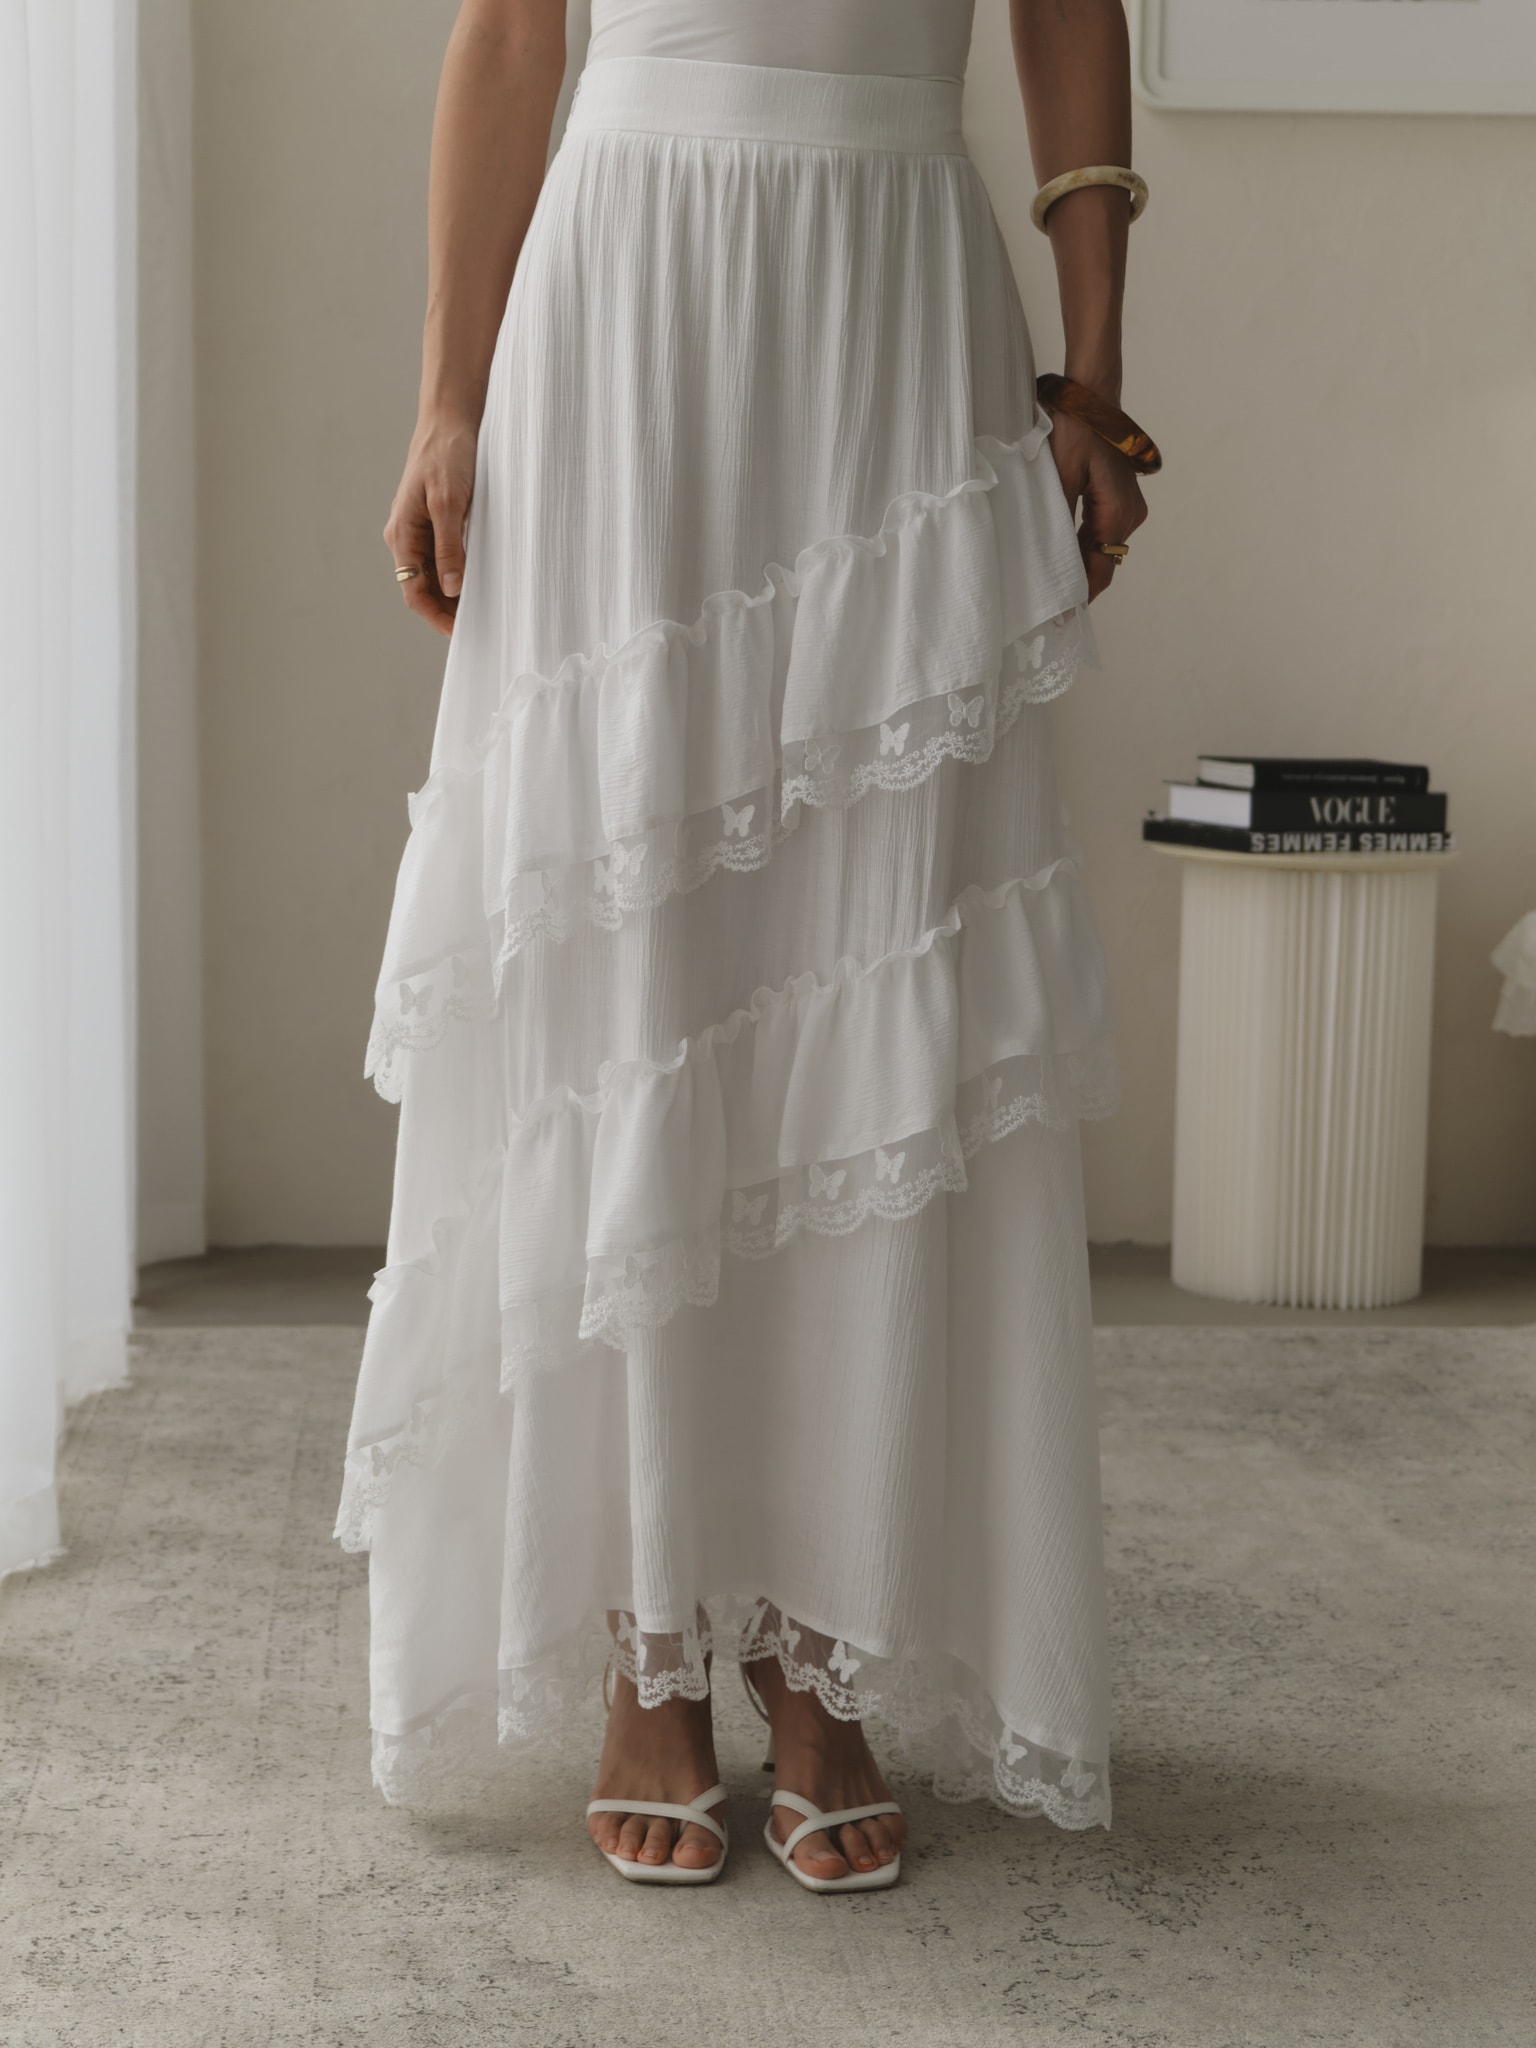 Layered maxi skirt with lace ruffles